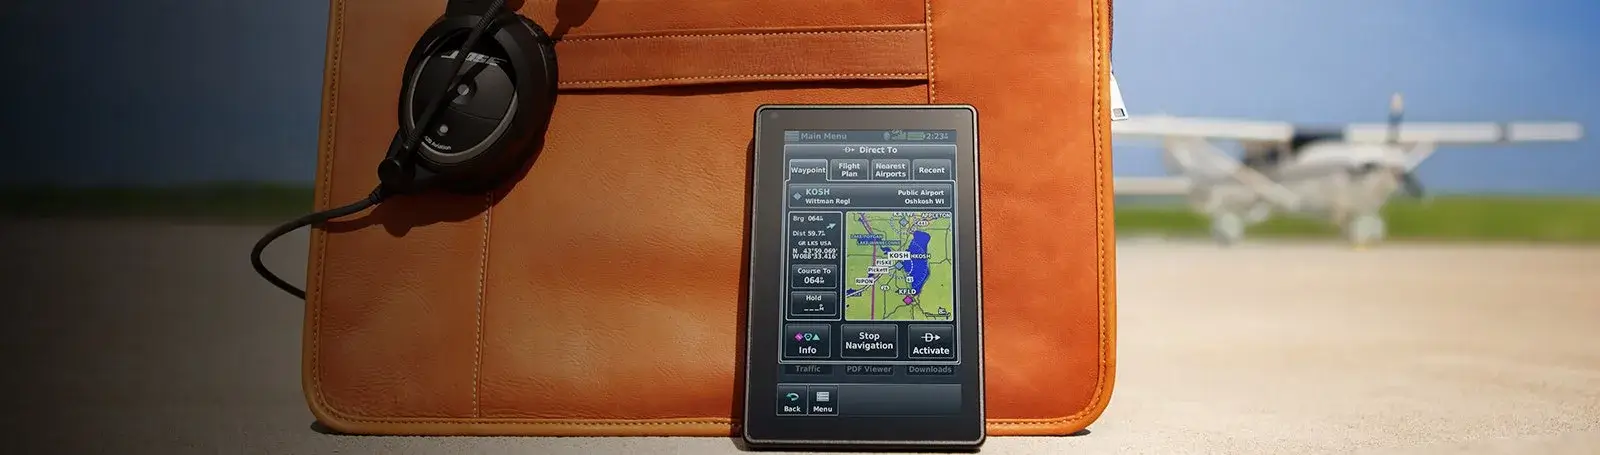 Advanced navigation.
In a portable package.